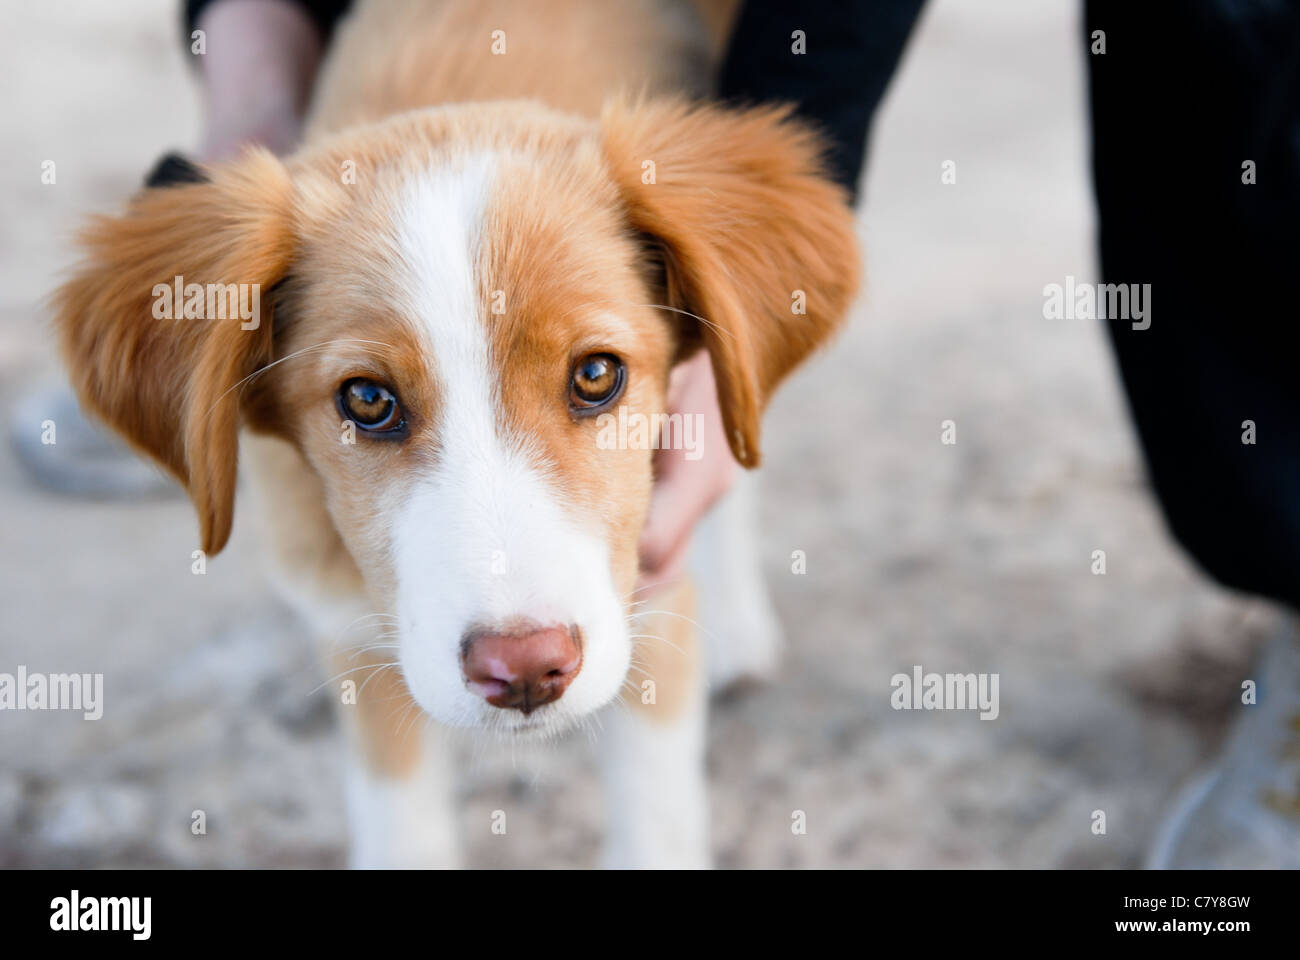 Rescue puppy giving those puppy dog eyes Stock Photo